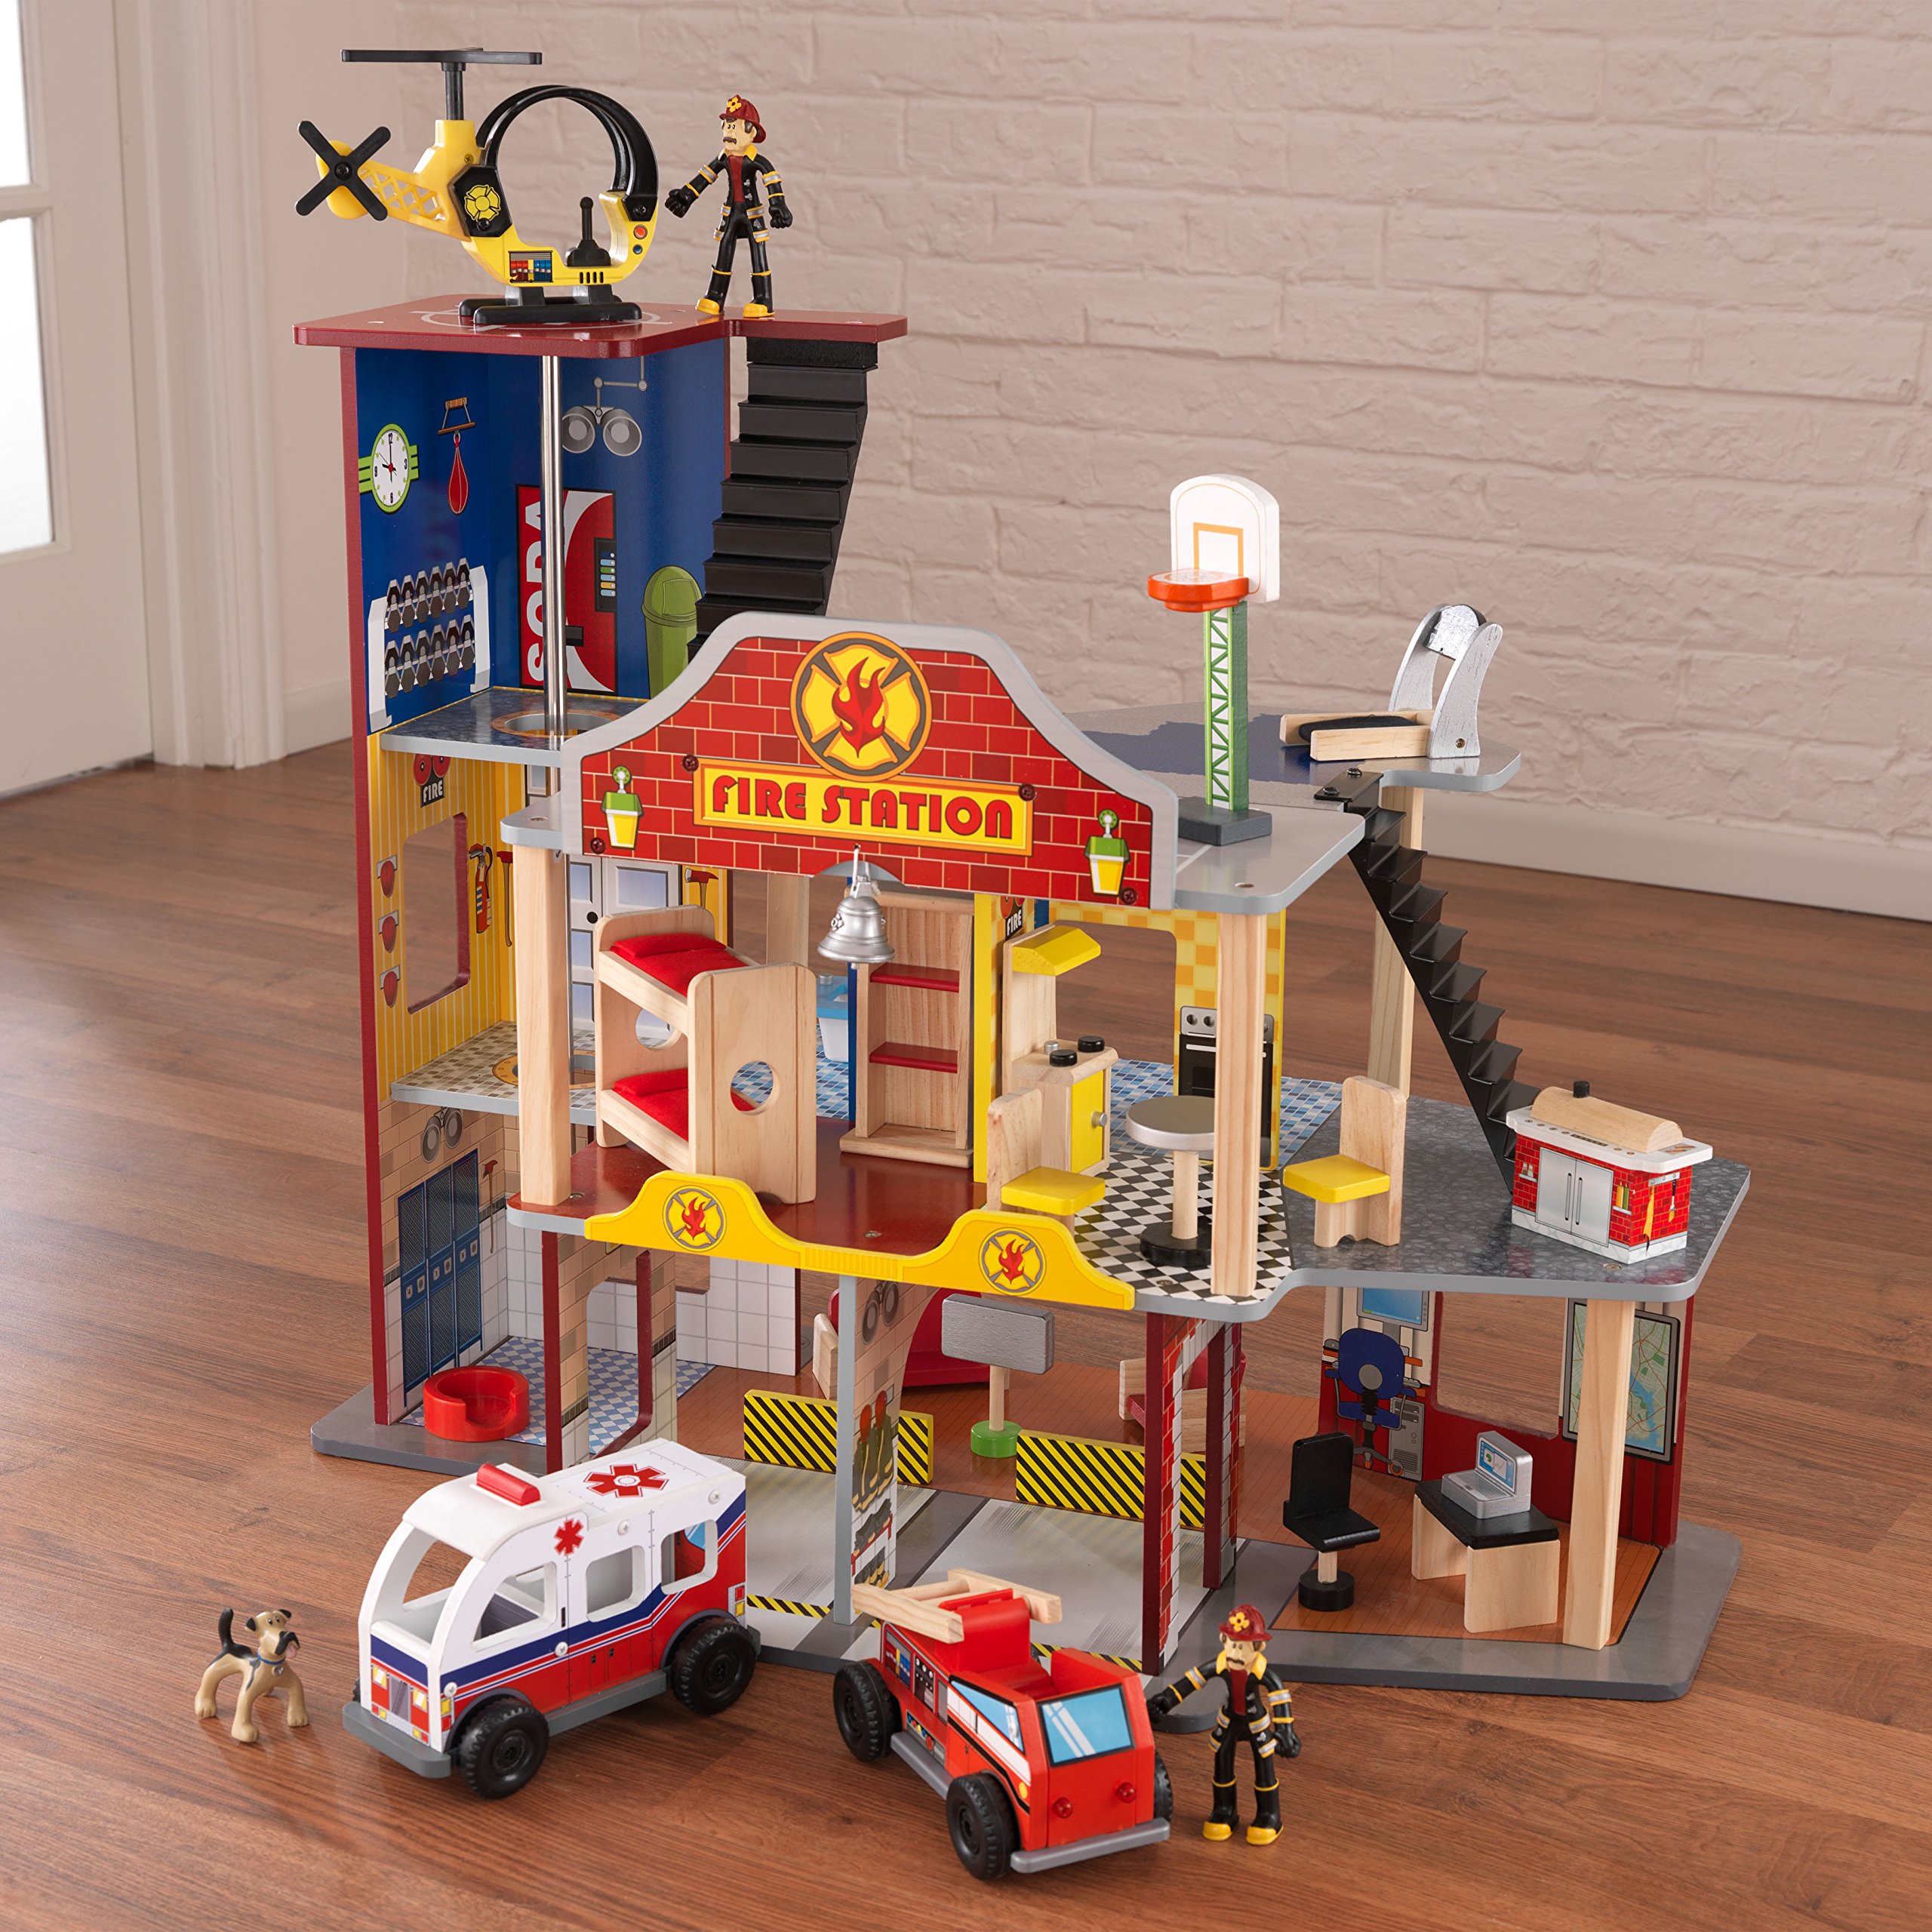 KidKraft Deluxe Wooden Fire Rescue Play Set with Ambulance, Fire Truck, Helicopter, Firefighters, 27 Pieces, Gift for Ages 3+